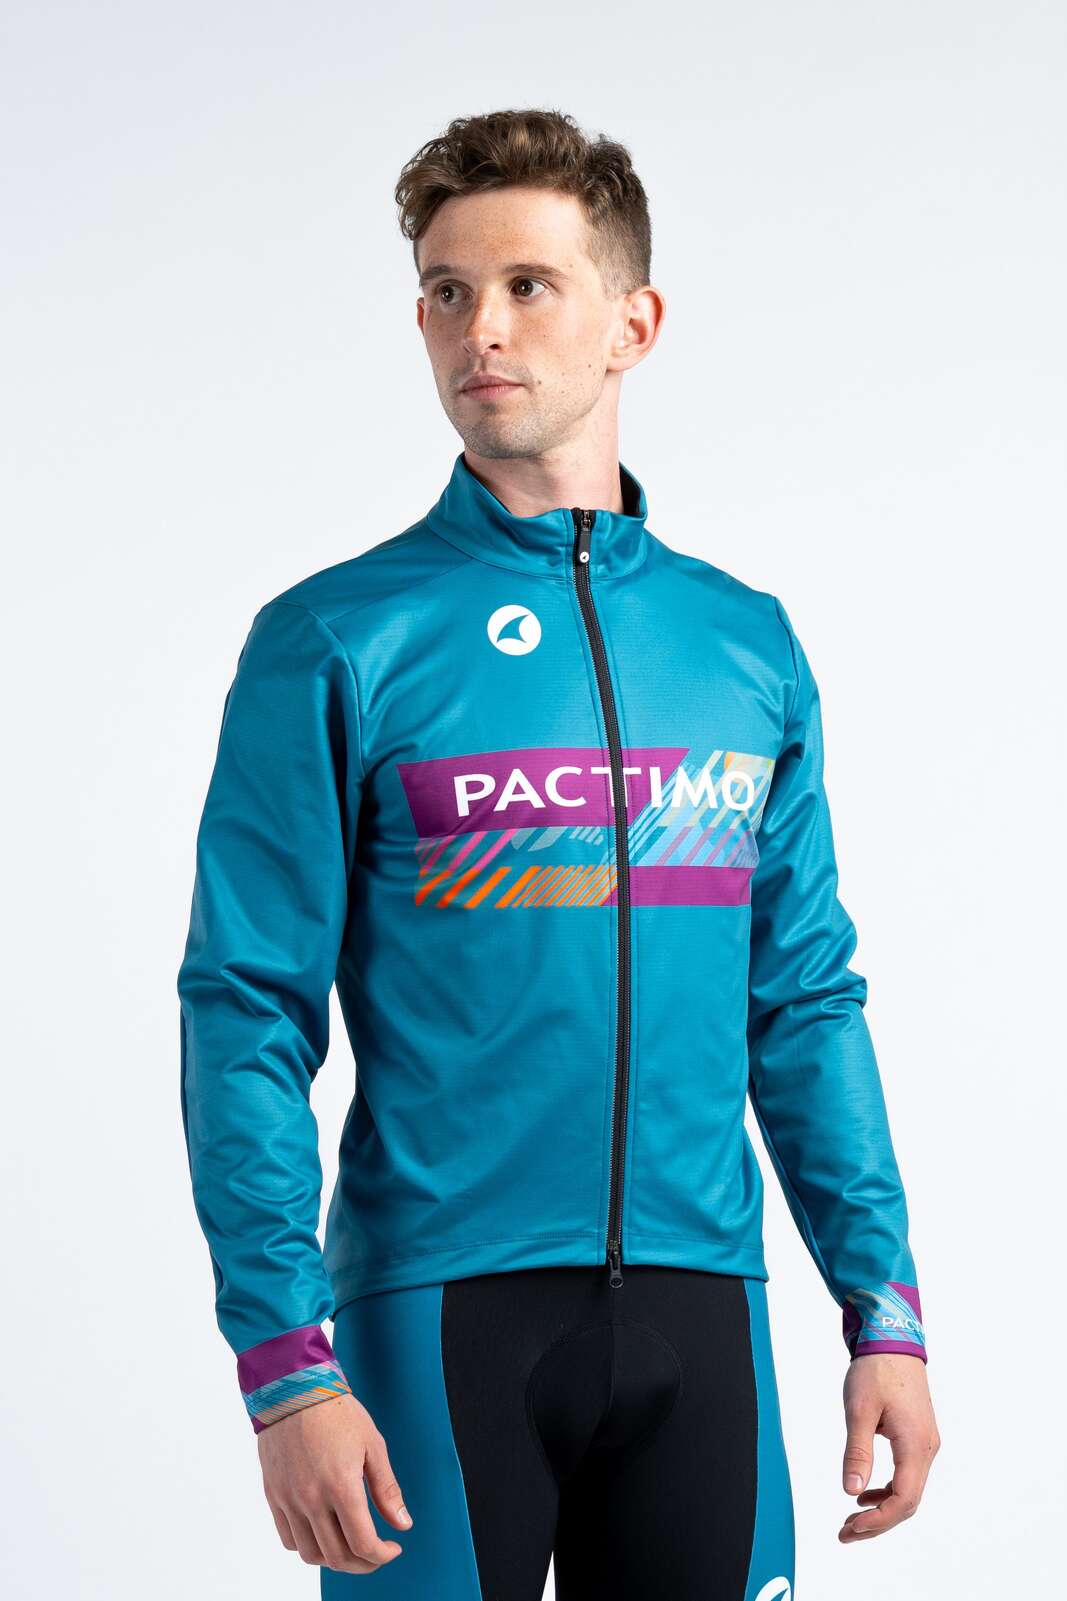 Men's Custom Cycling Jacket - Alpine Front View